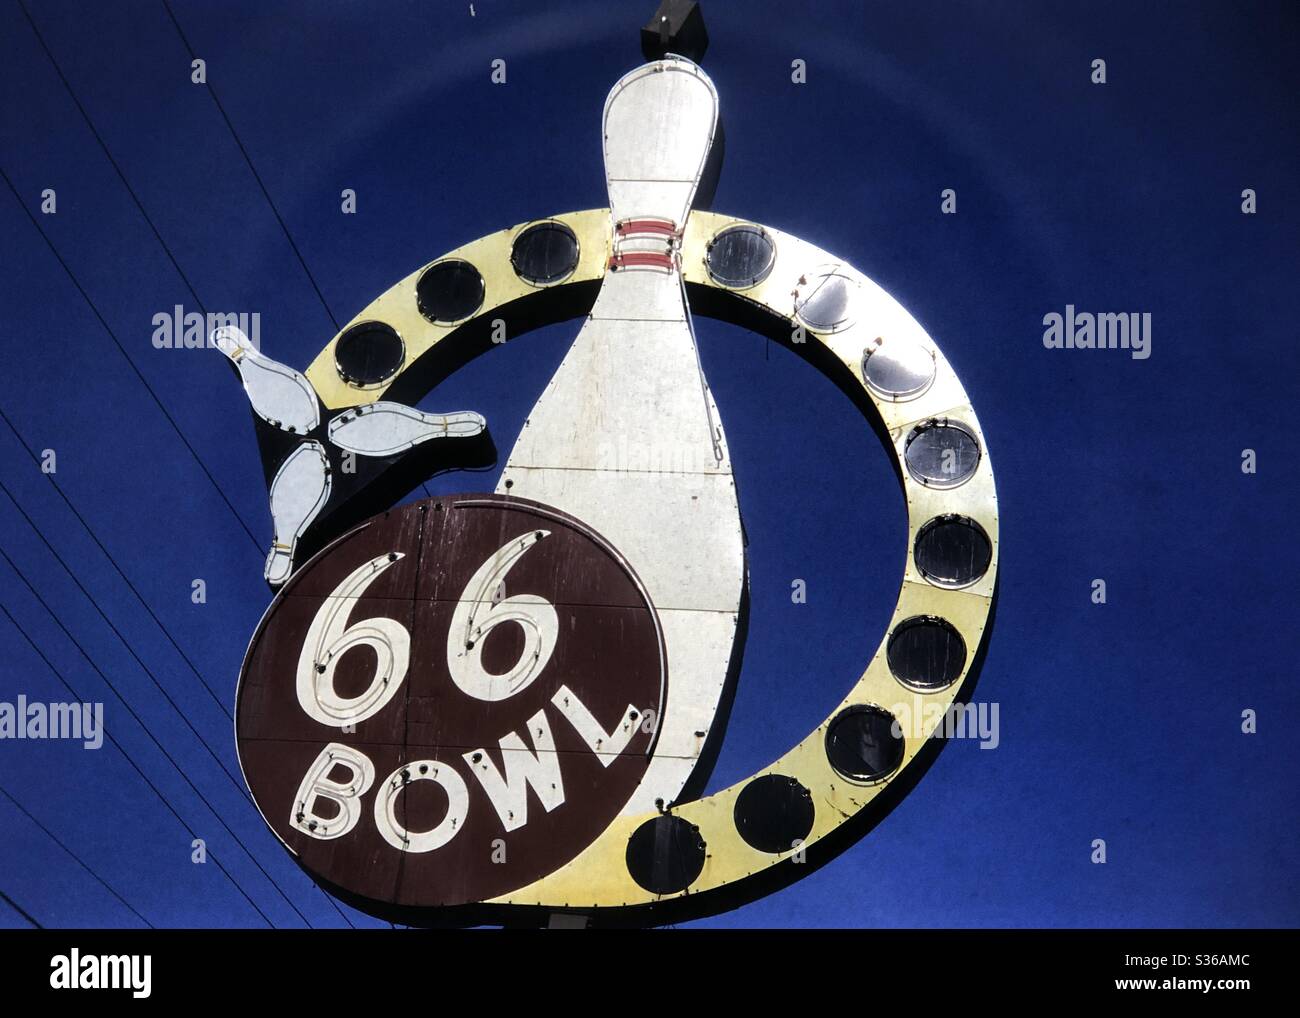 Bowling Alley sign Route 66 Missouri bright blue sky graphic design Stock Photo